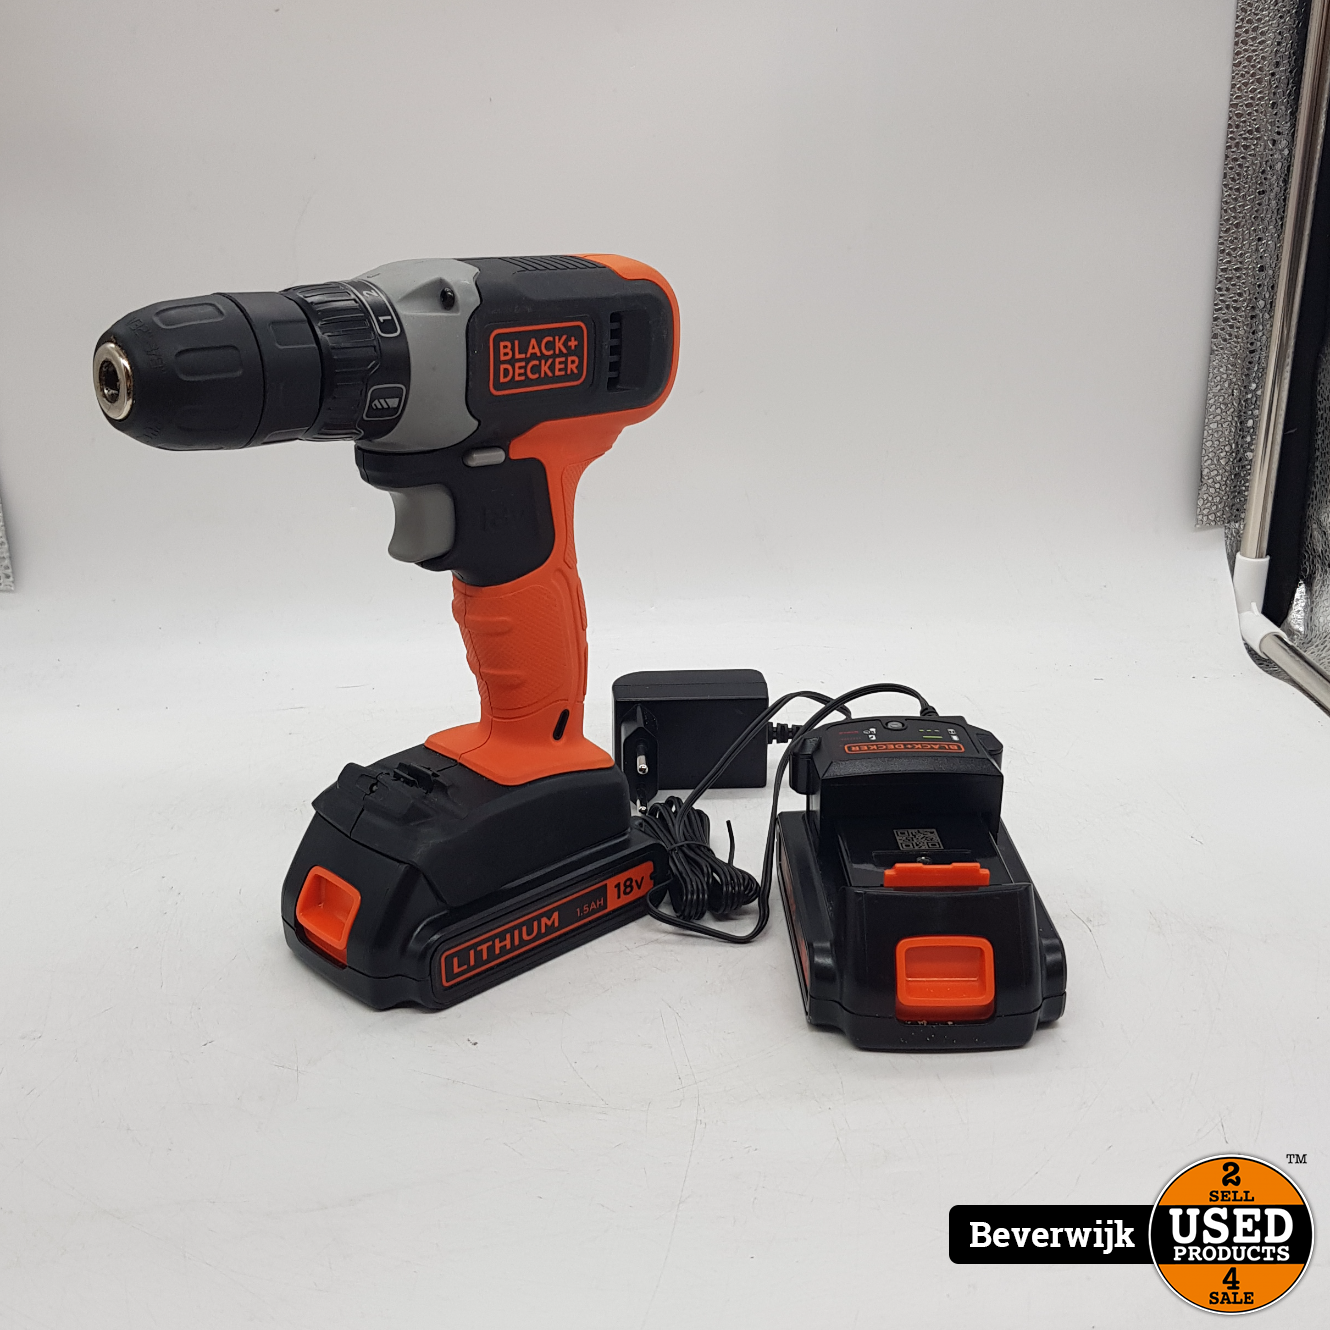 Black+Decker accuboormachine BCD001C2-QW 18V (2 accu's) - In Staat - Used Products